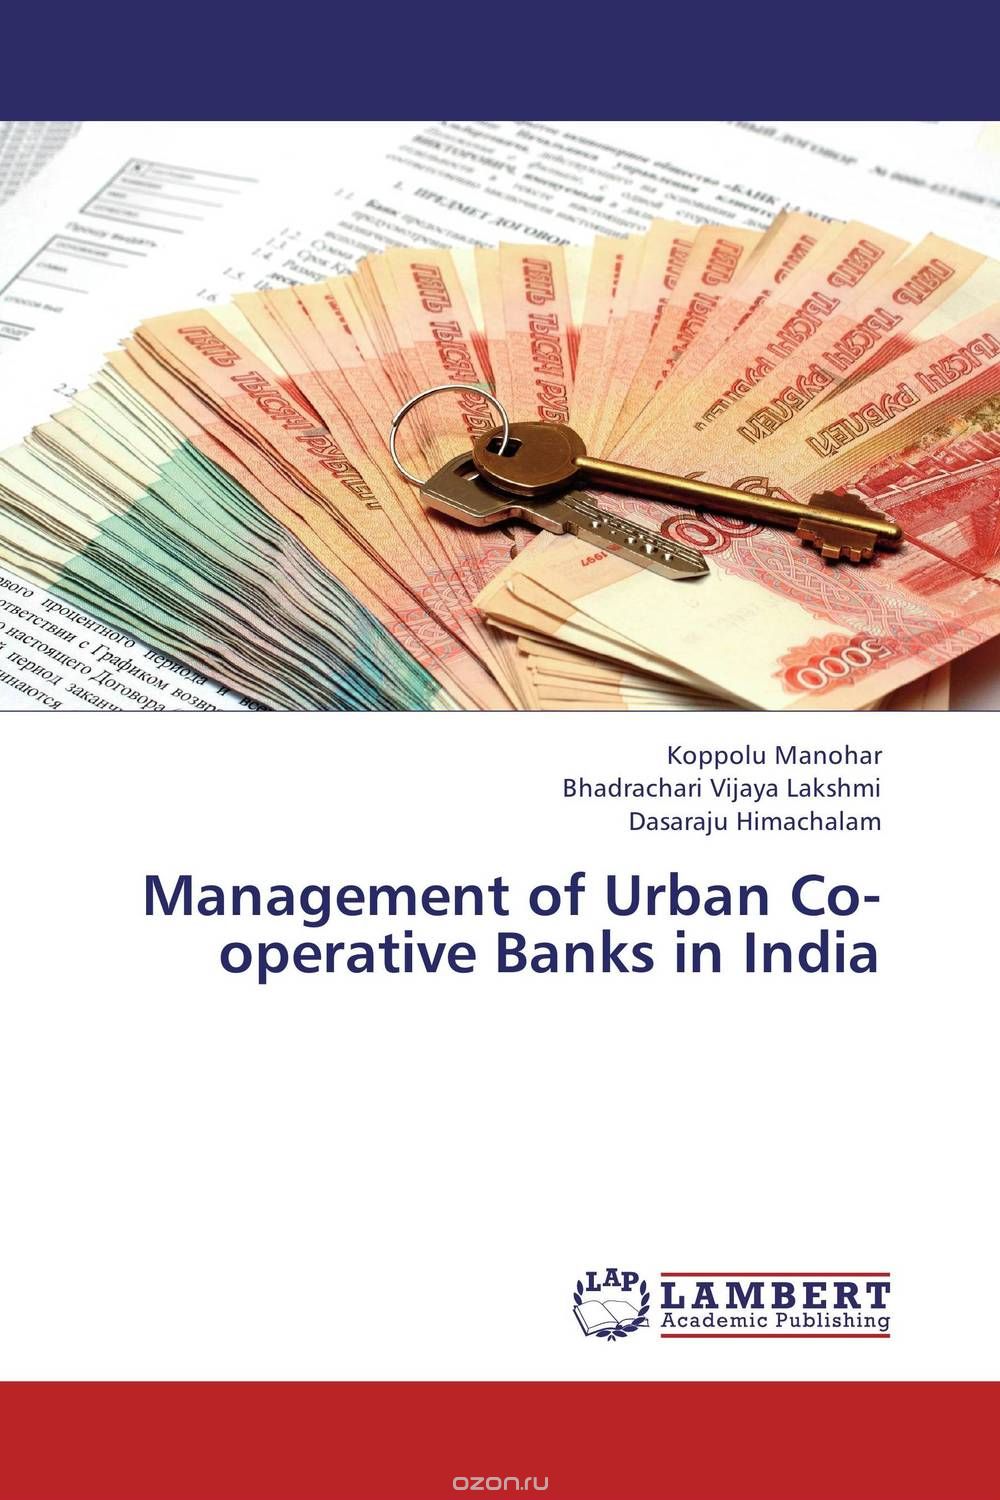 Management of Urban Co-operative Banks in India